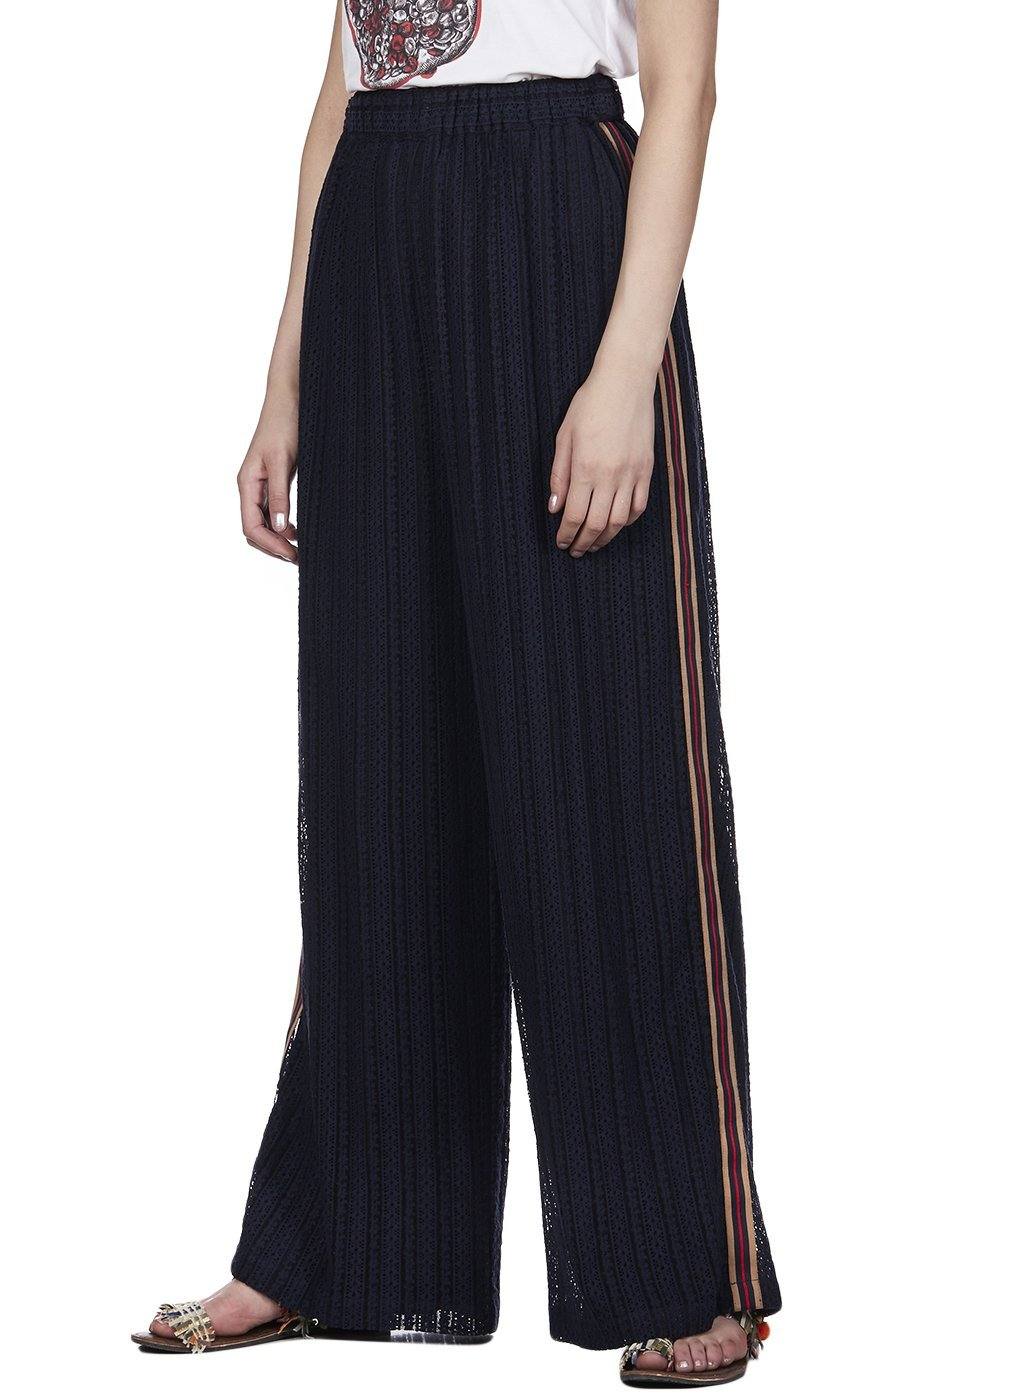 LOVE LACED TROUSERS - Genes online store 2020